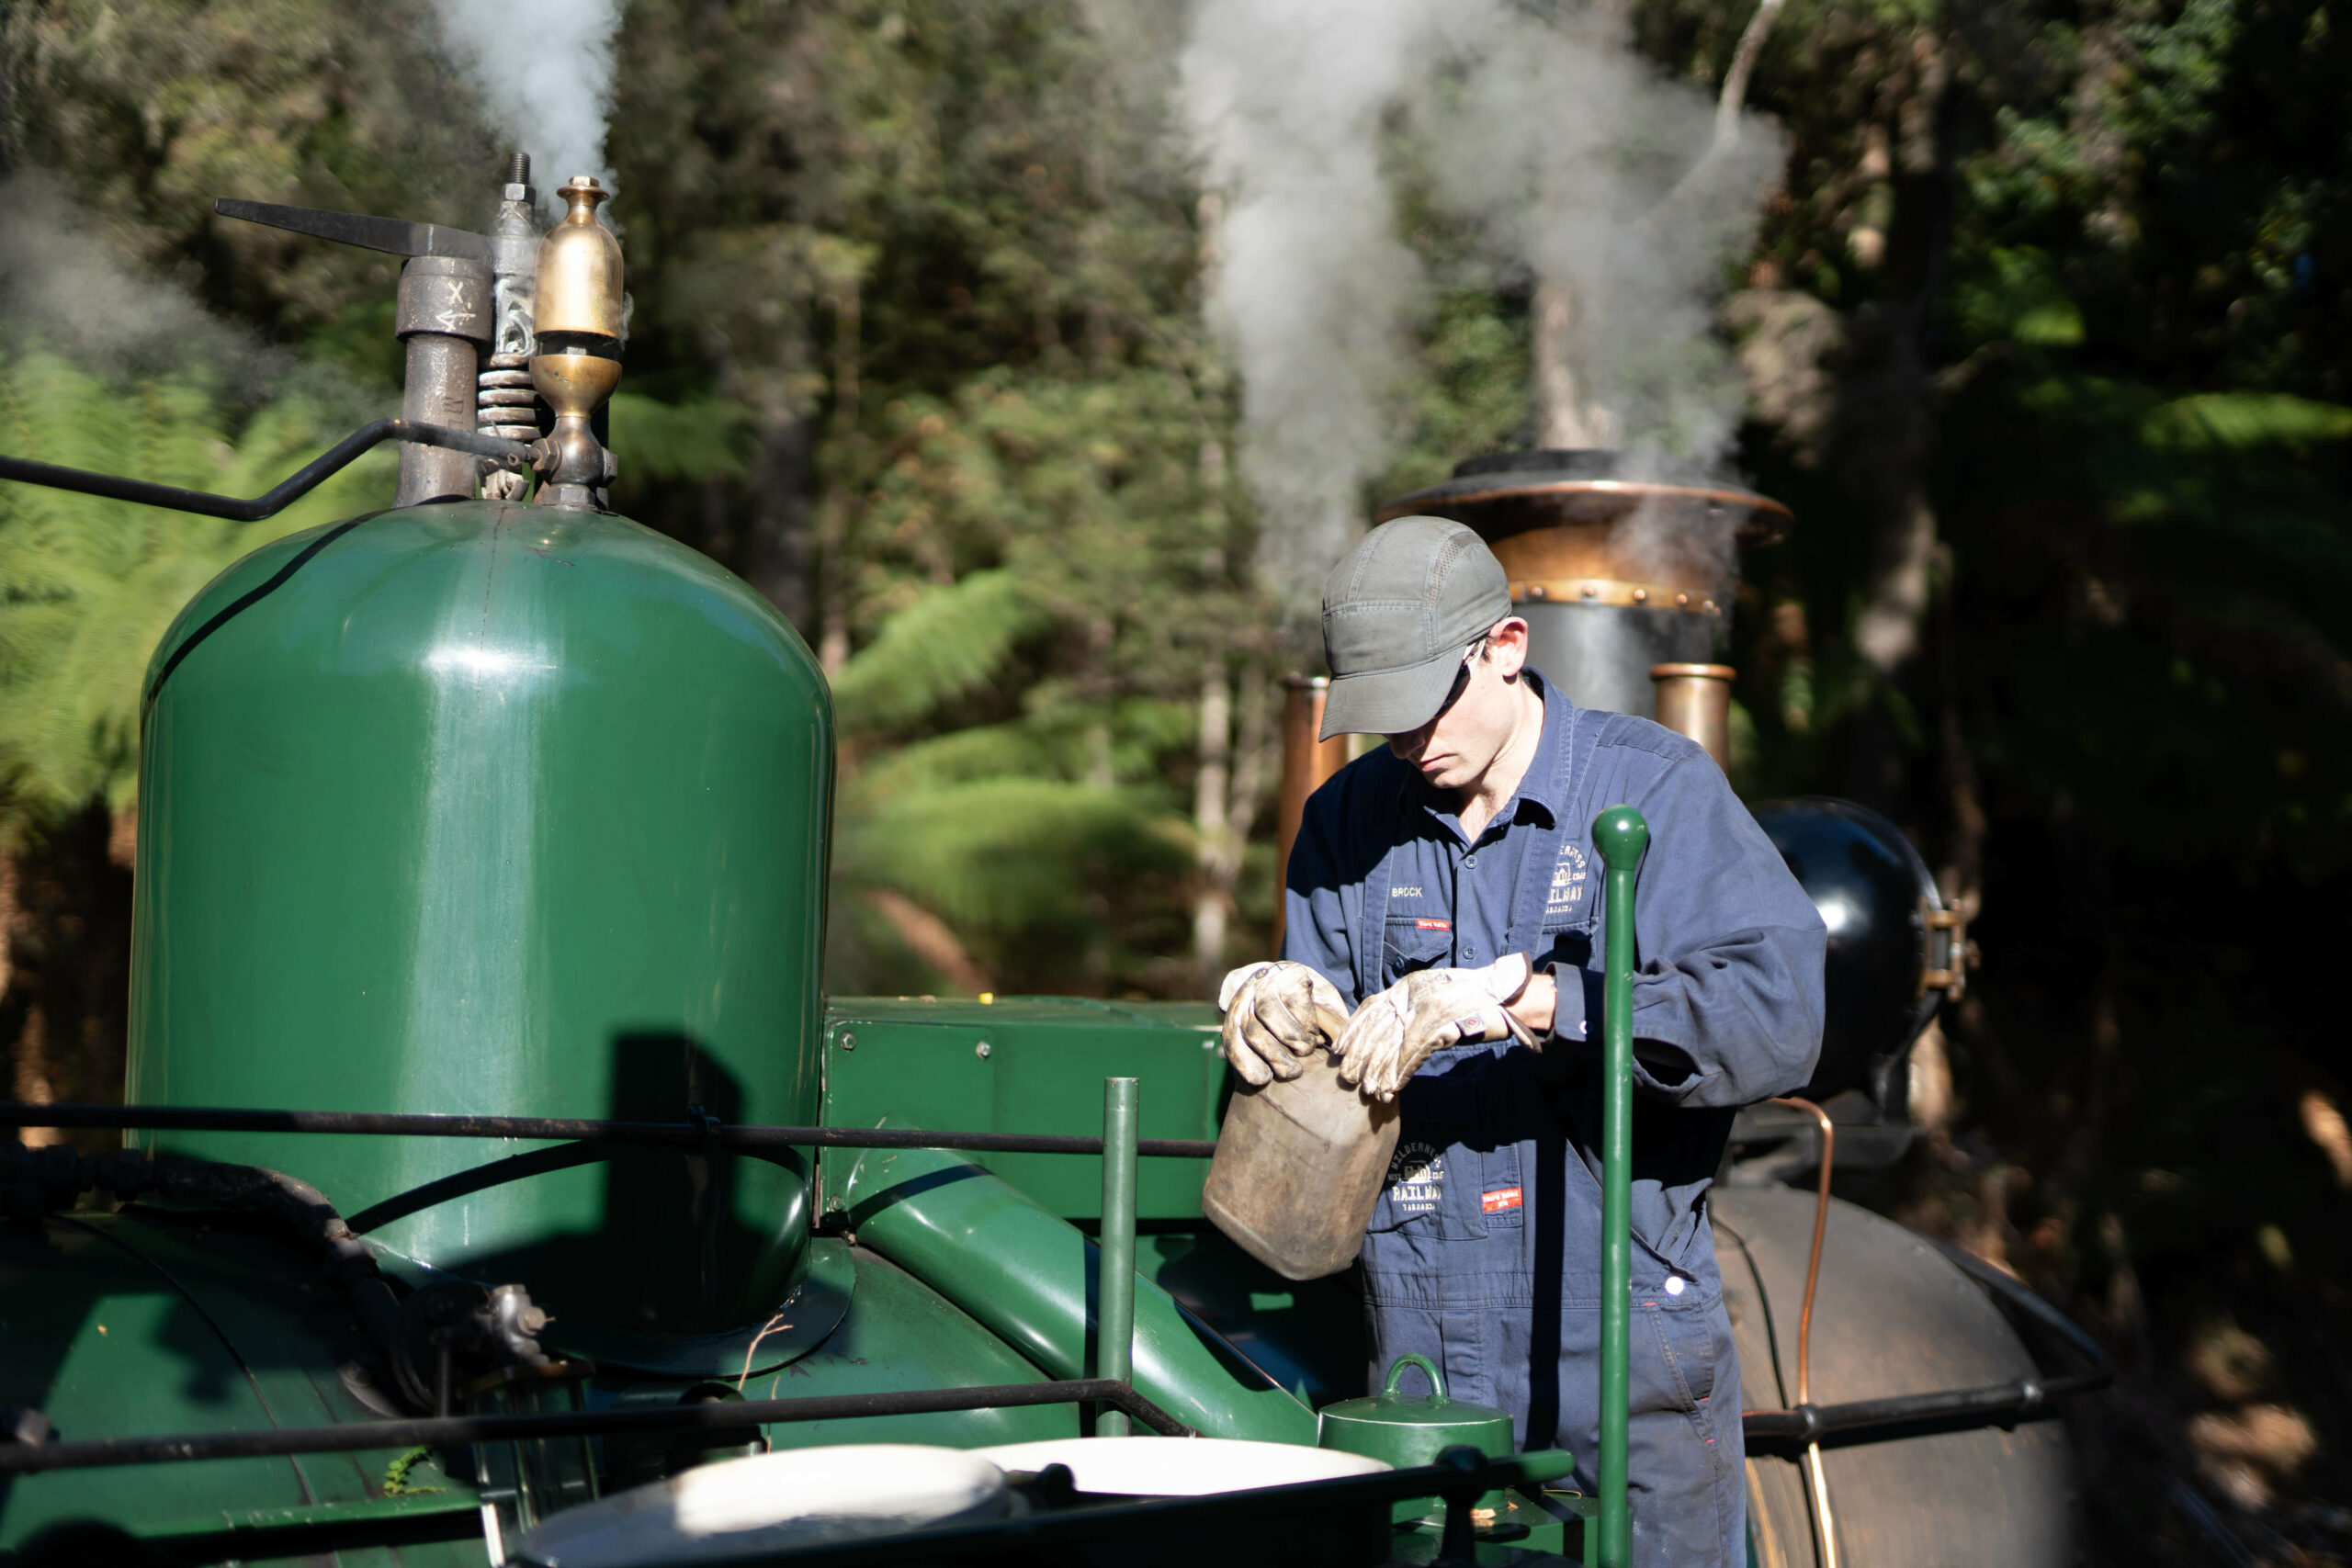 A driver is seen opening a black and greasy oil container while a green locomotive emits steam from brass components to the left of him.